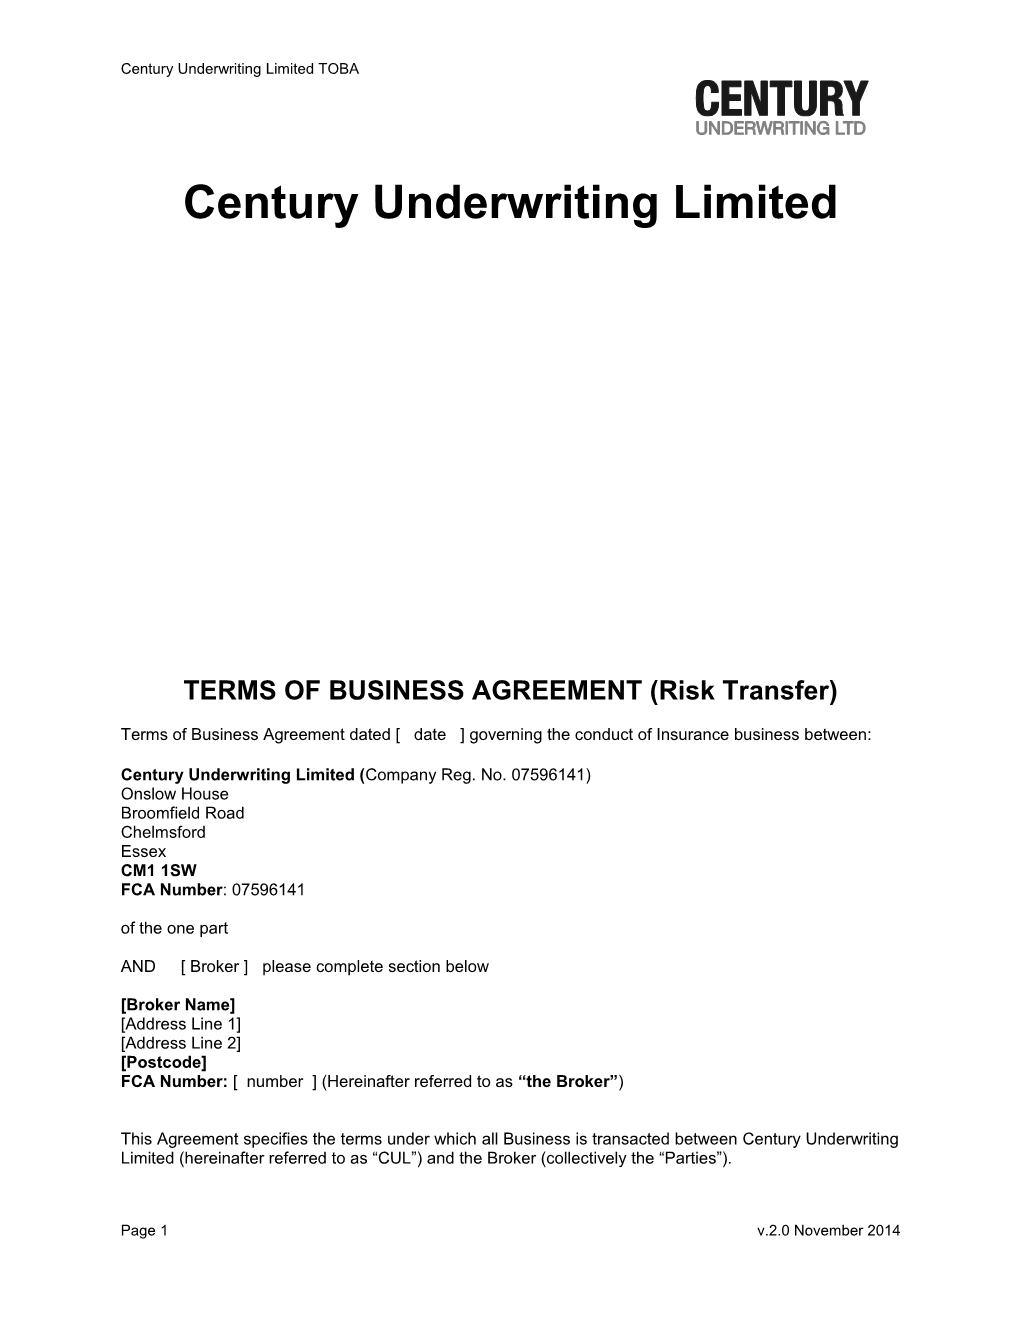 TERMS of BUSINESS AGREEMENT (Risk Transfer)